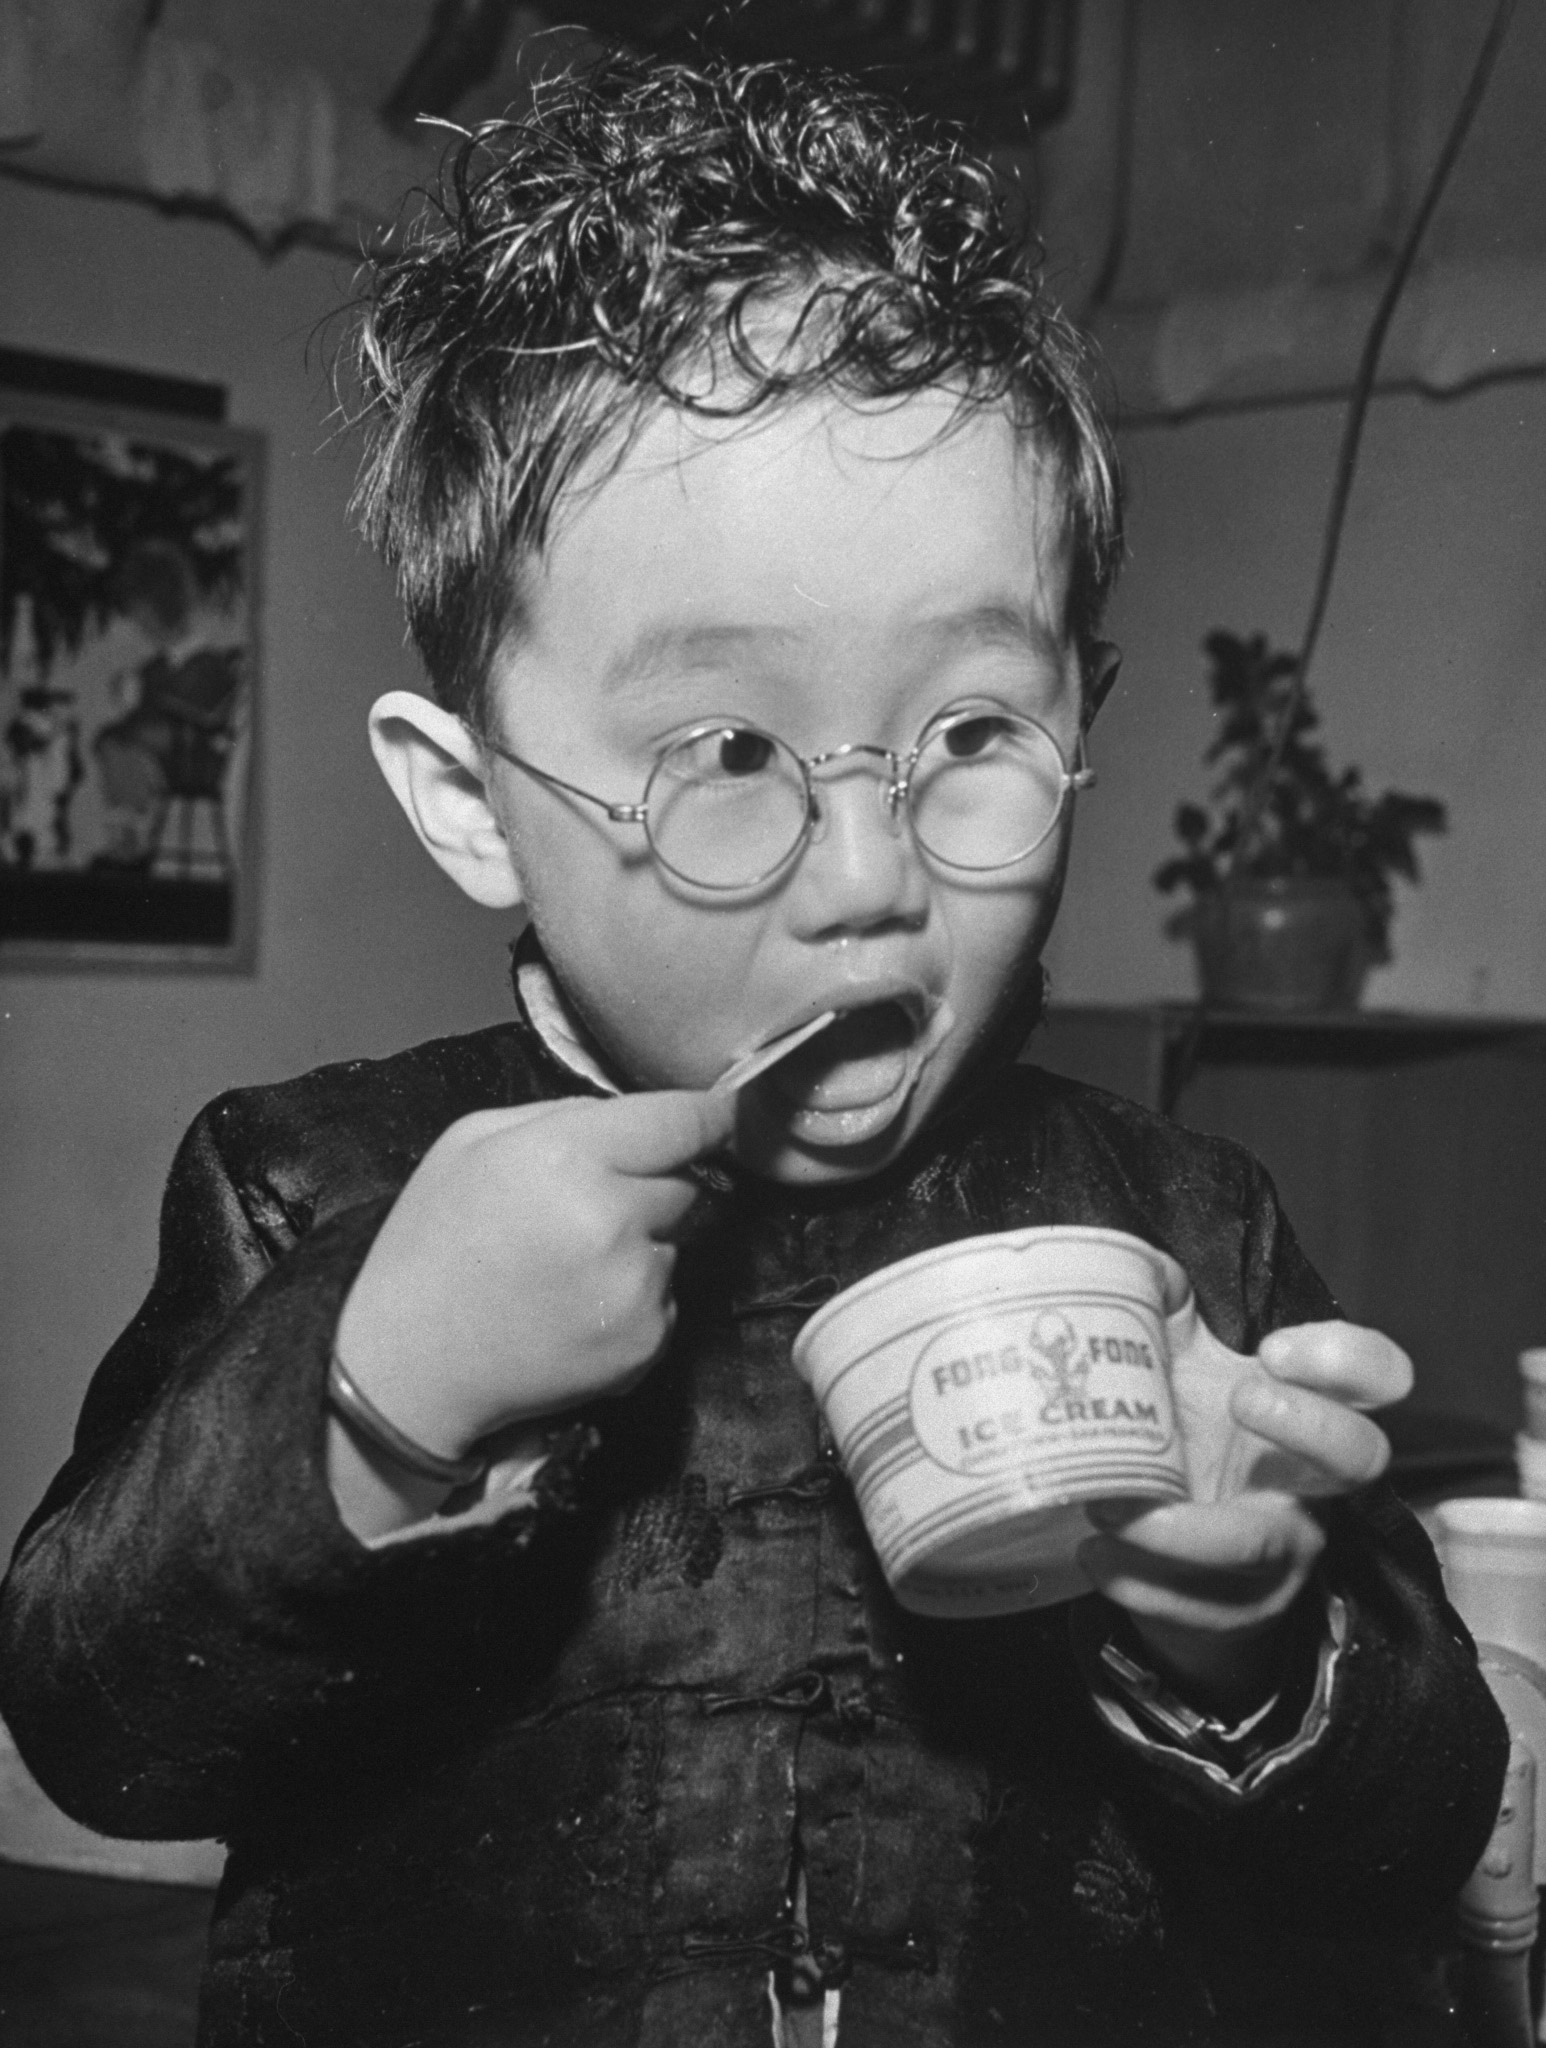 A young boy eating ice cream, 1942.